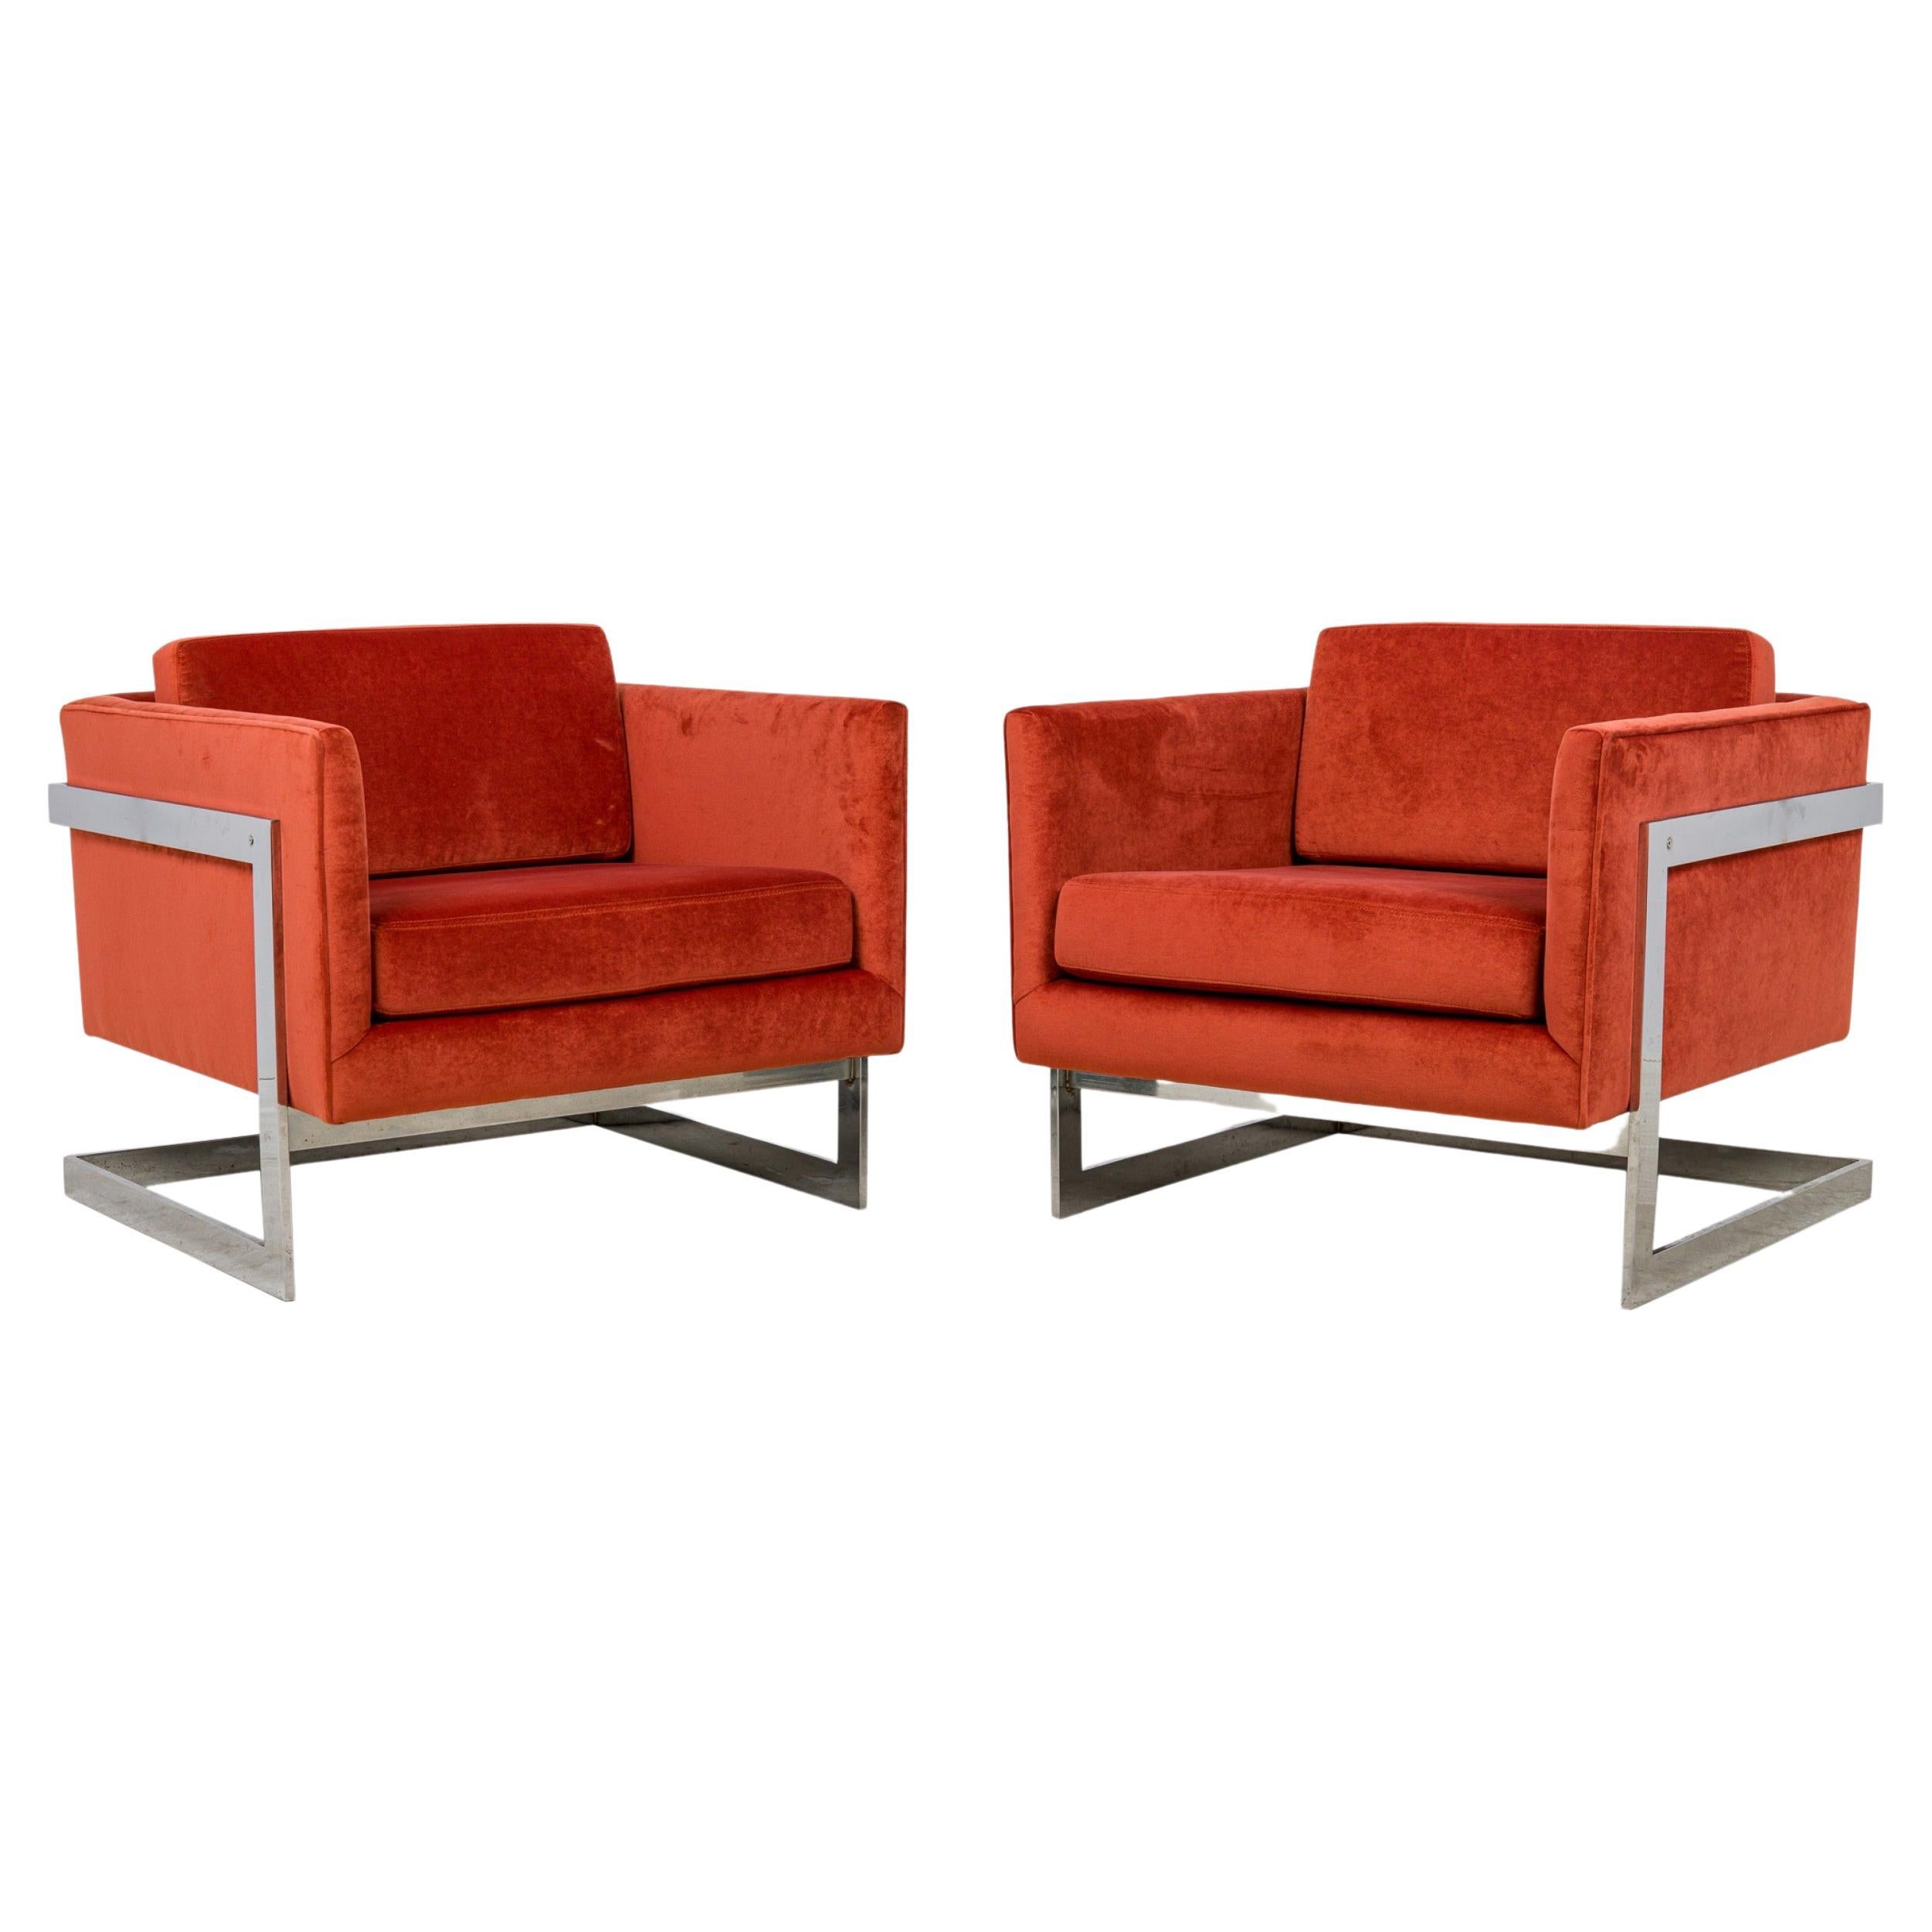 Pair of Milo Baughman for Thayer Coggin Orange Floating Cube Lounge / Armchairs